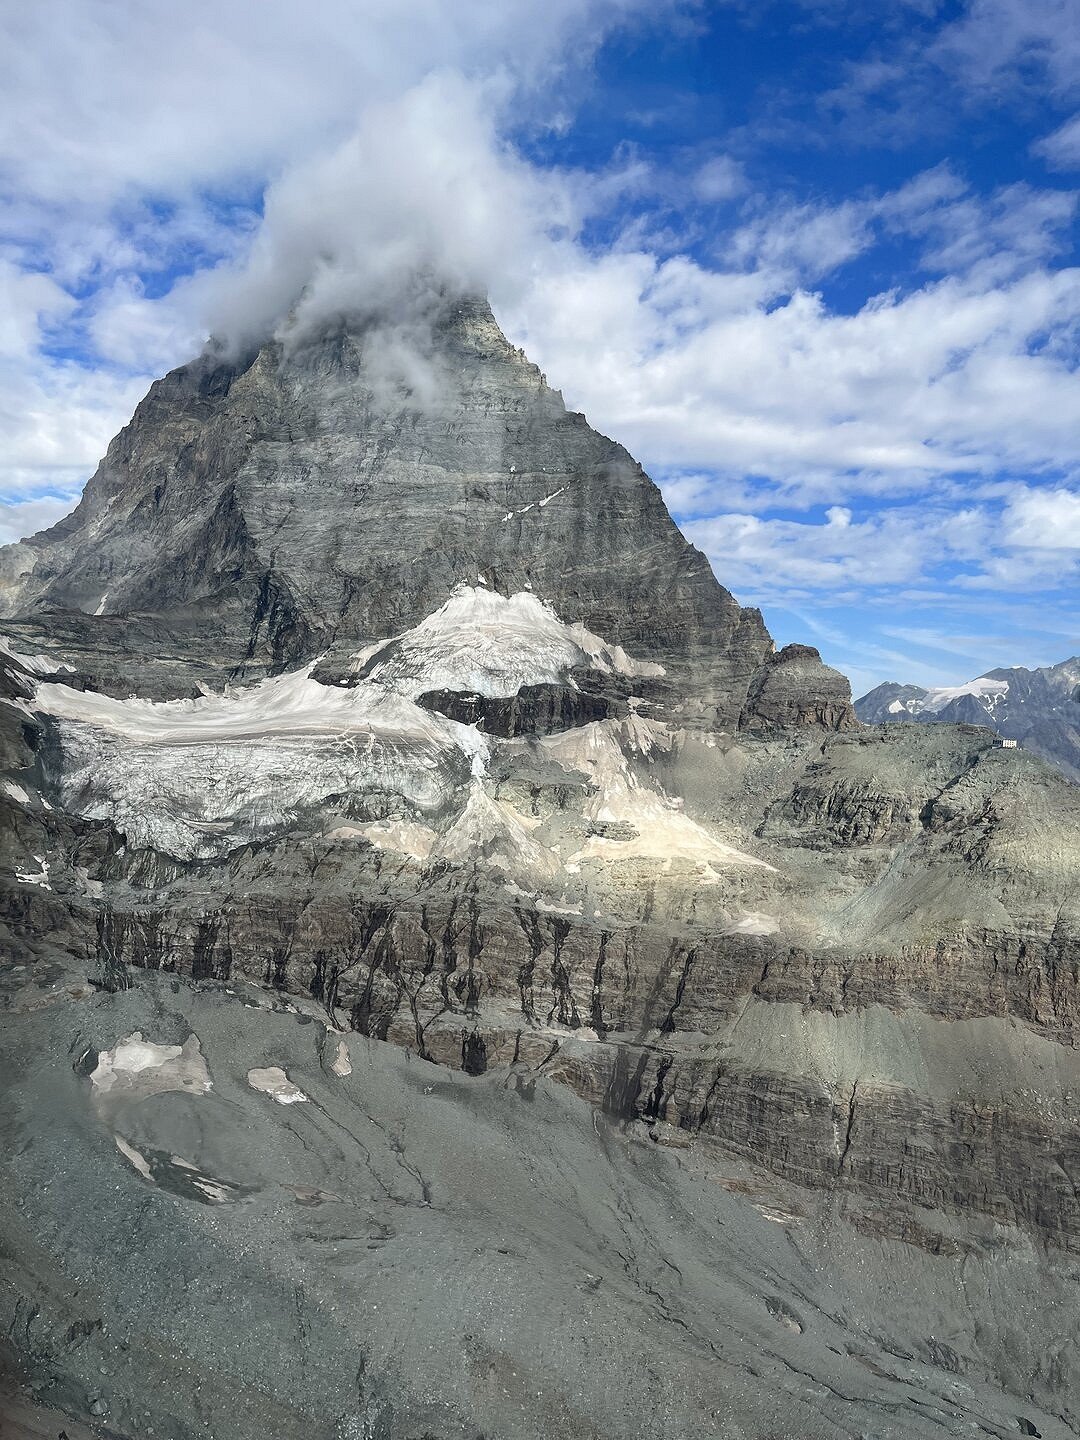 Glaciers under stress and black ice patches on the Matterhorn.  © Jan Beutel